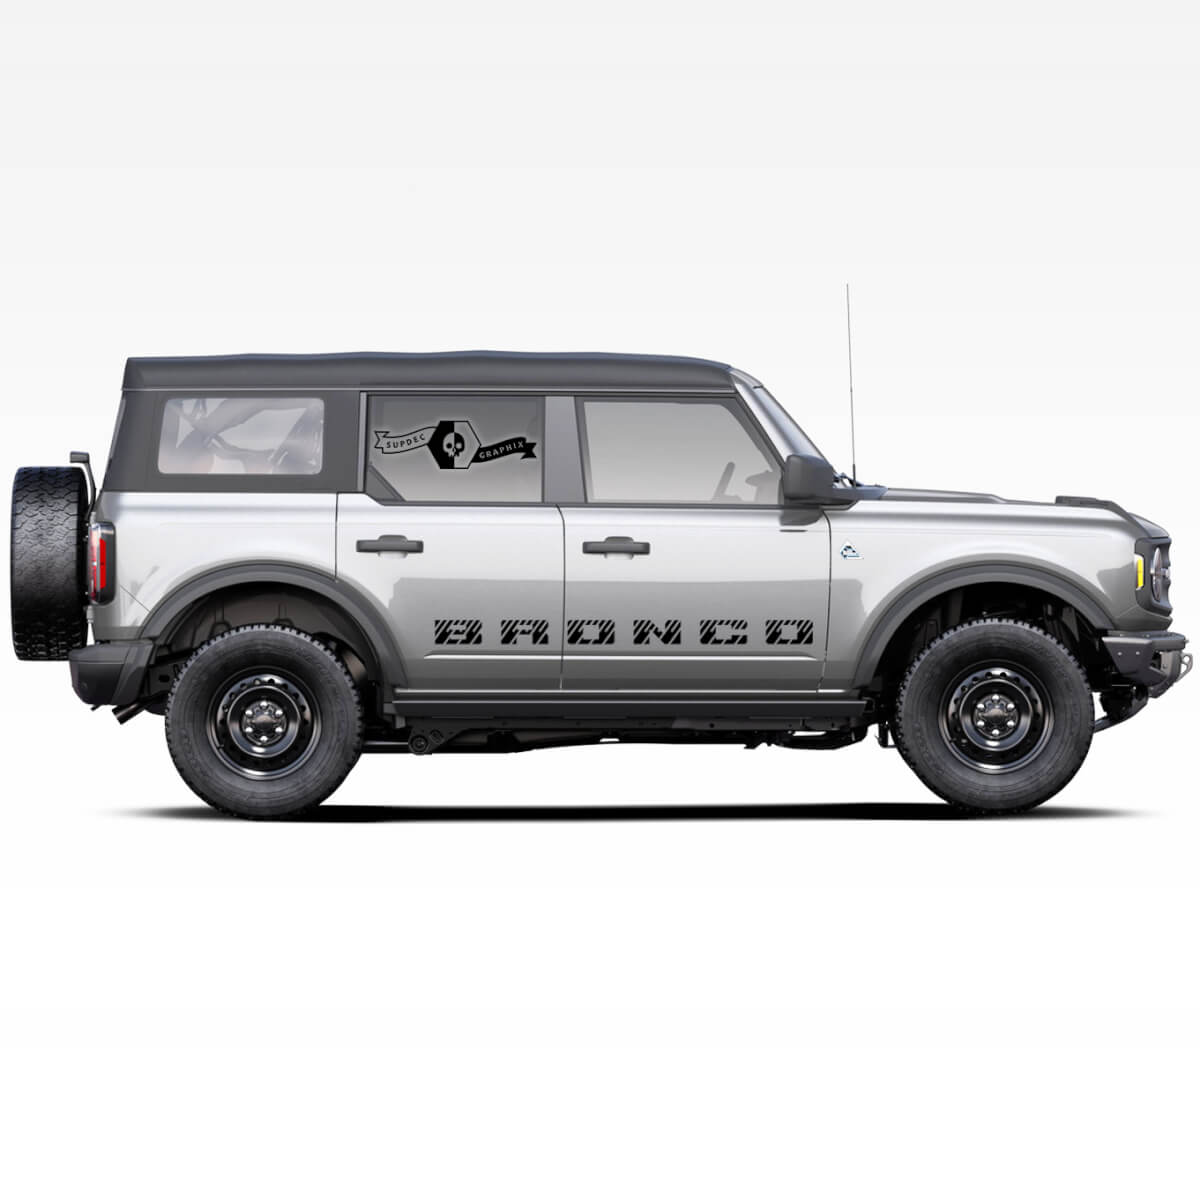 2 Bronco Logo Side Doors Decals Stickers for Ford Bronco 2021